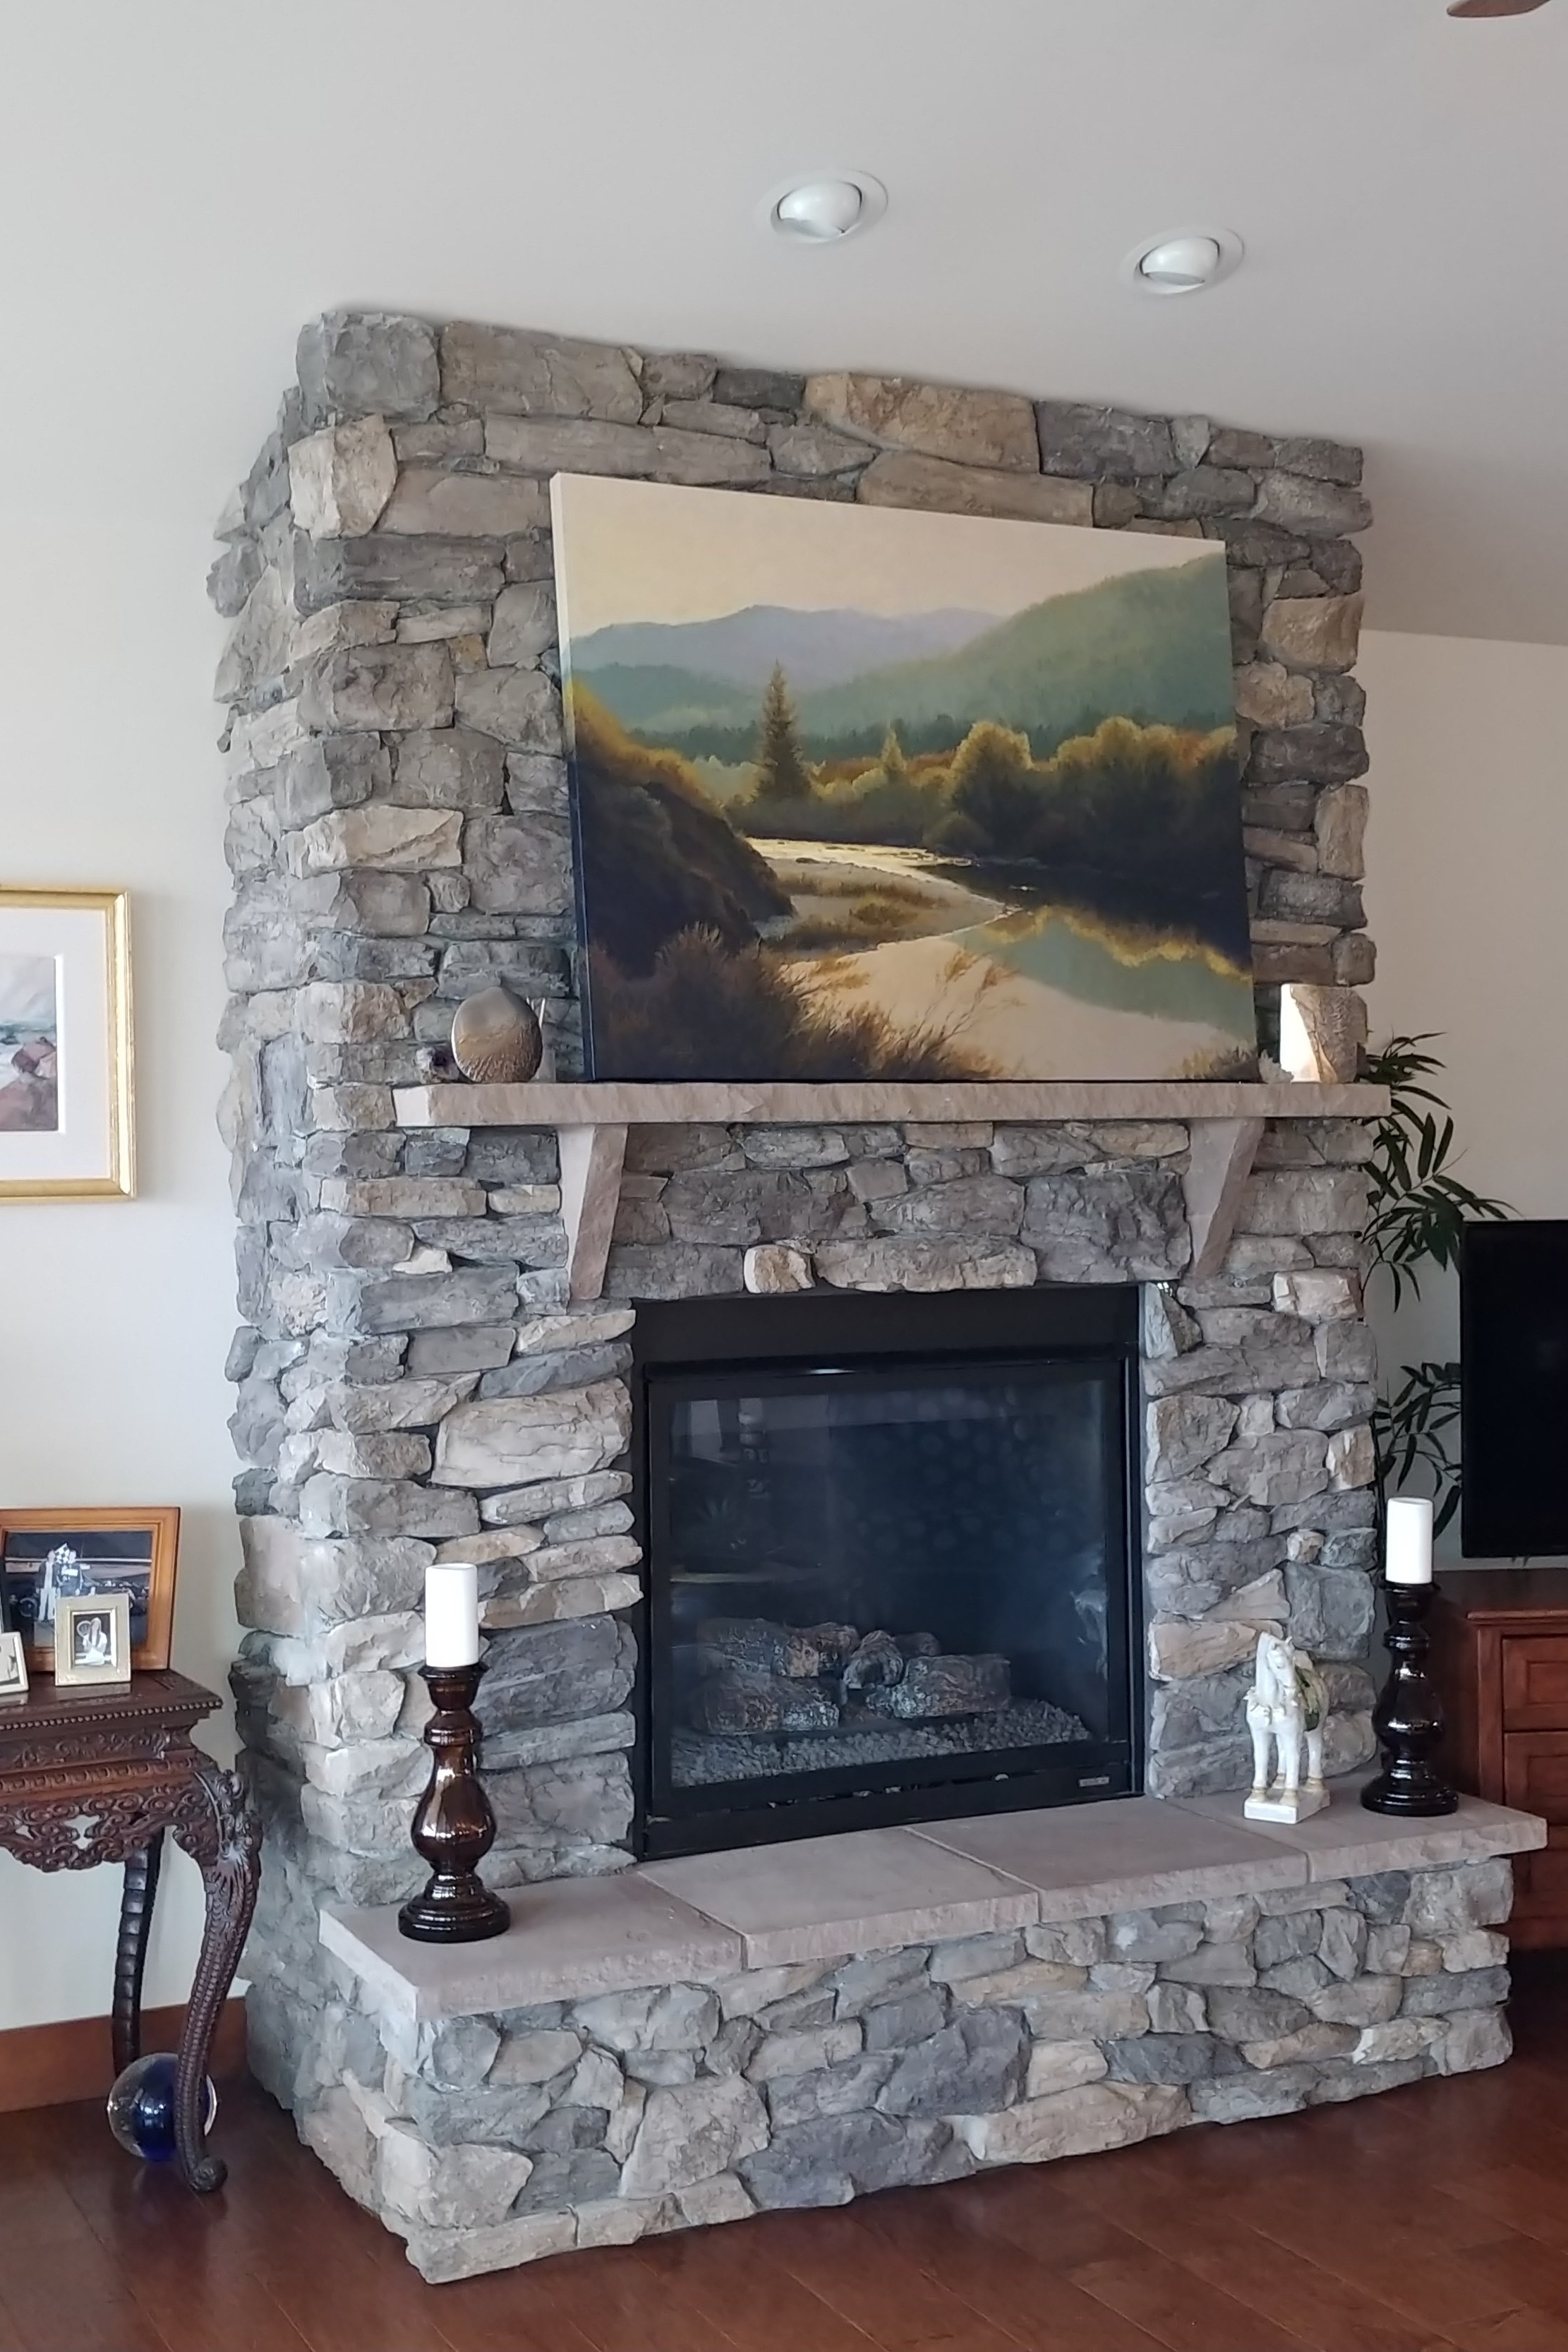   Local Stone Face, Stone Mantle &amp; Raised Hearth with Gas Fireplace  